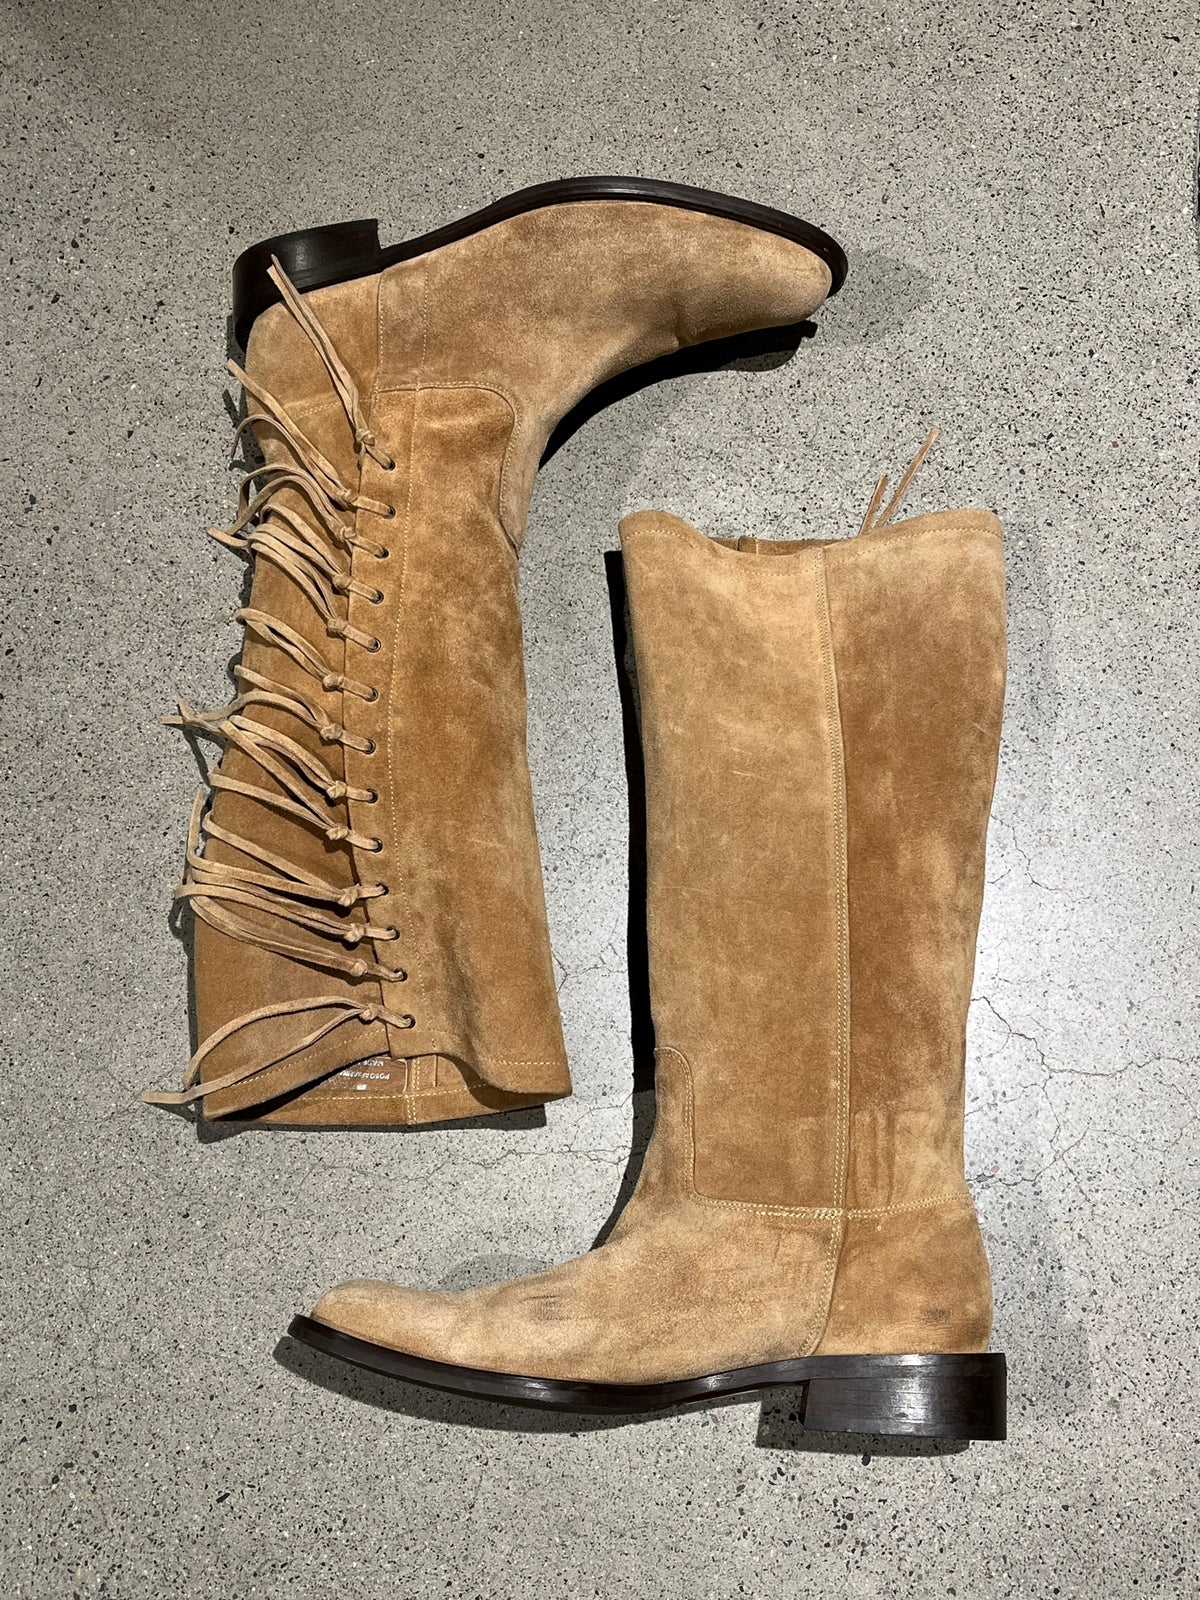 Vintage Coach Tall Fringe Boots